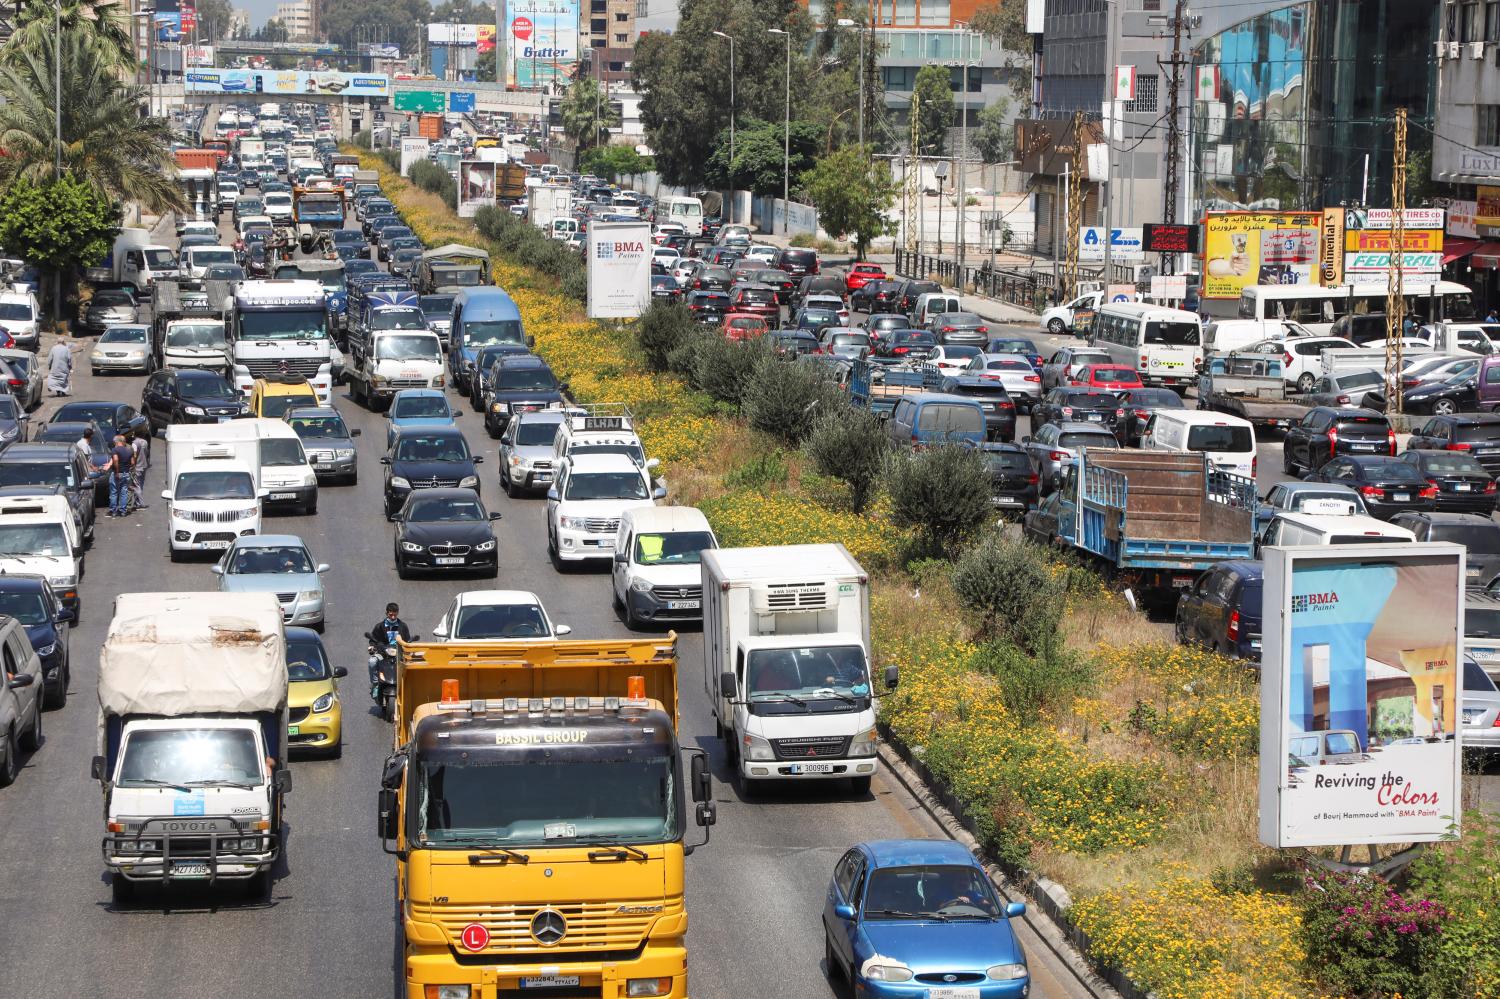 A view shows cars stuck in a traffic jam in Beirut, Lebanon June 10, 2021. Picture taken June 10, 2021. REUTERS/Mohamed Azakir